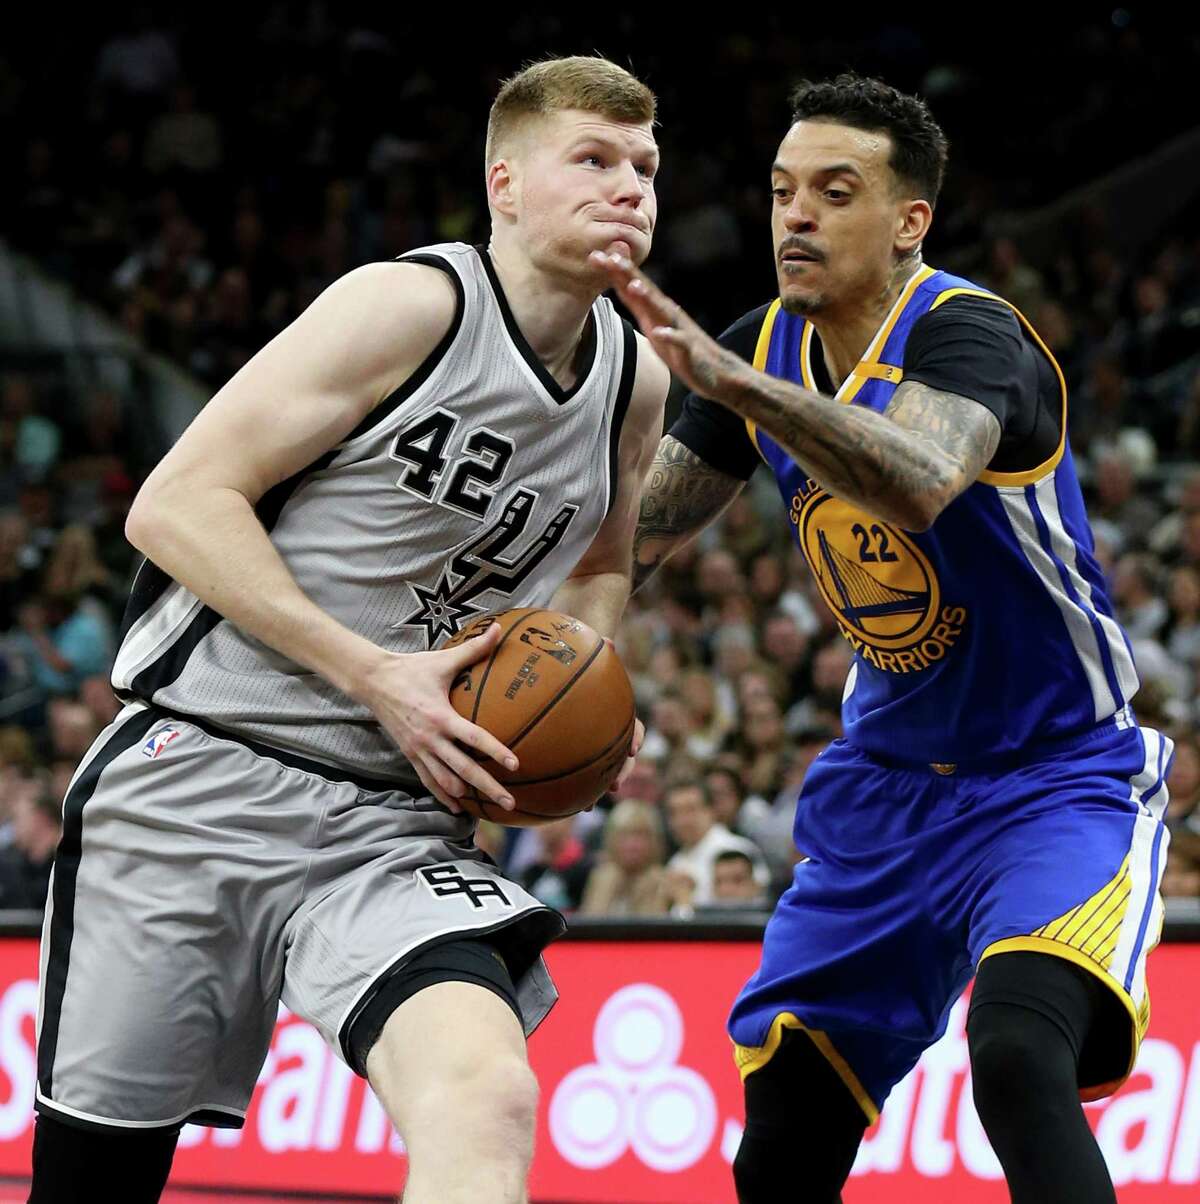 Spurs’ Davis Bertans looks for room around the Golden State Warriors’ Matt Barnes during second half action on March 11, 2017 at the AT&T Center.